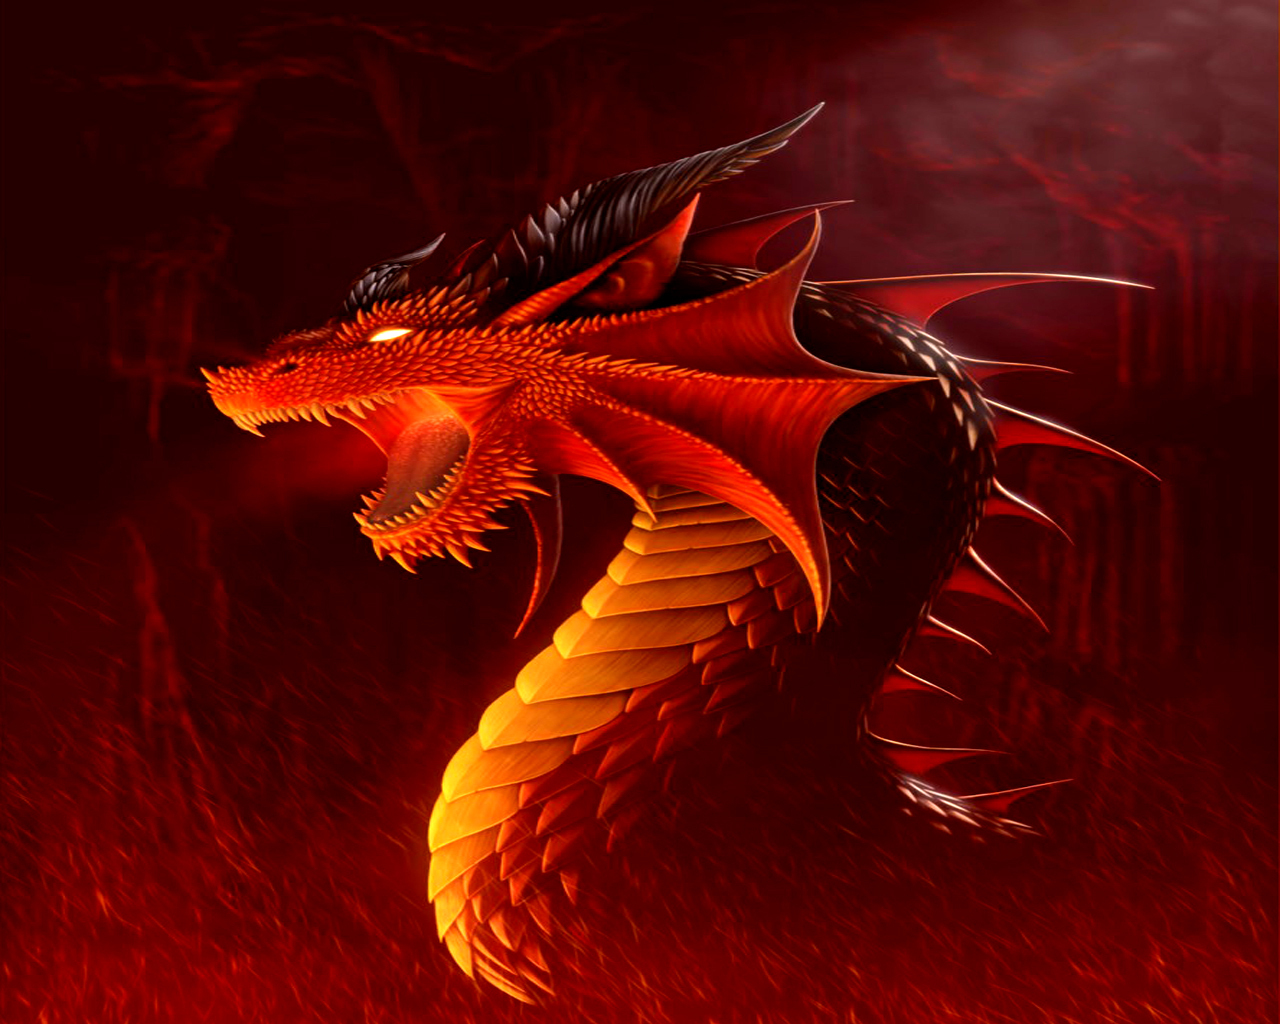 dragon wallpaper hd,dragon,red,fictional character,cg artwork,mythical creature